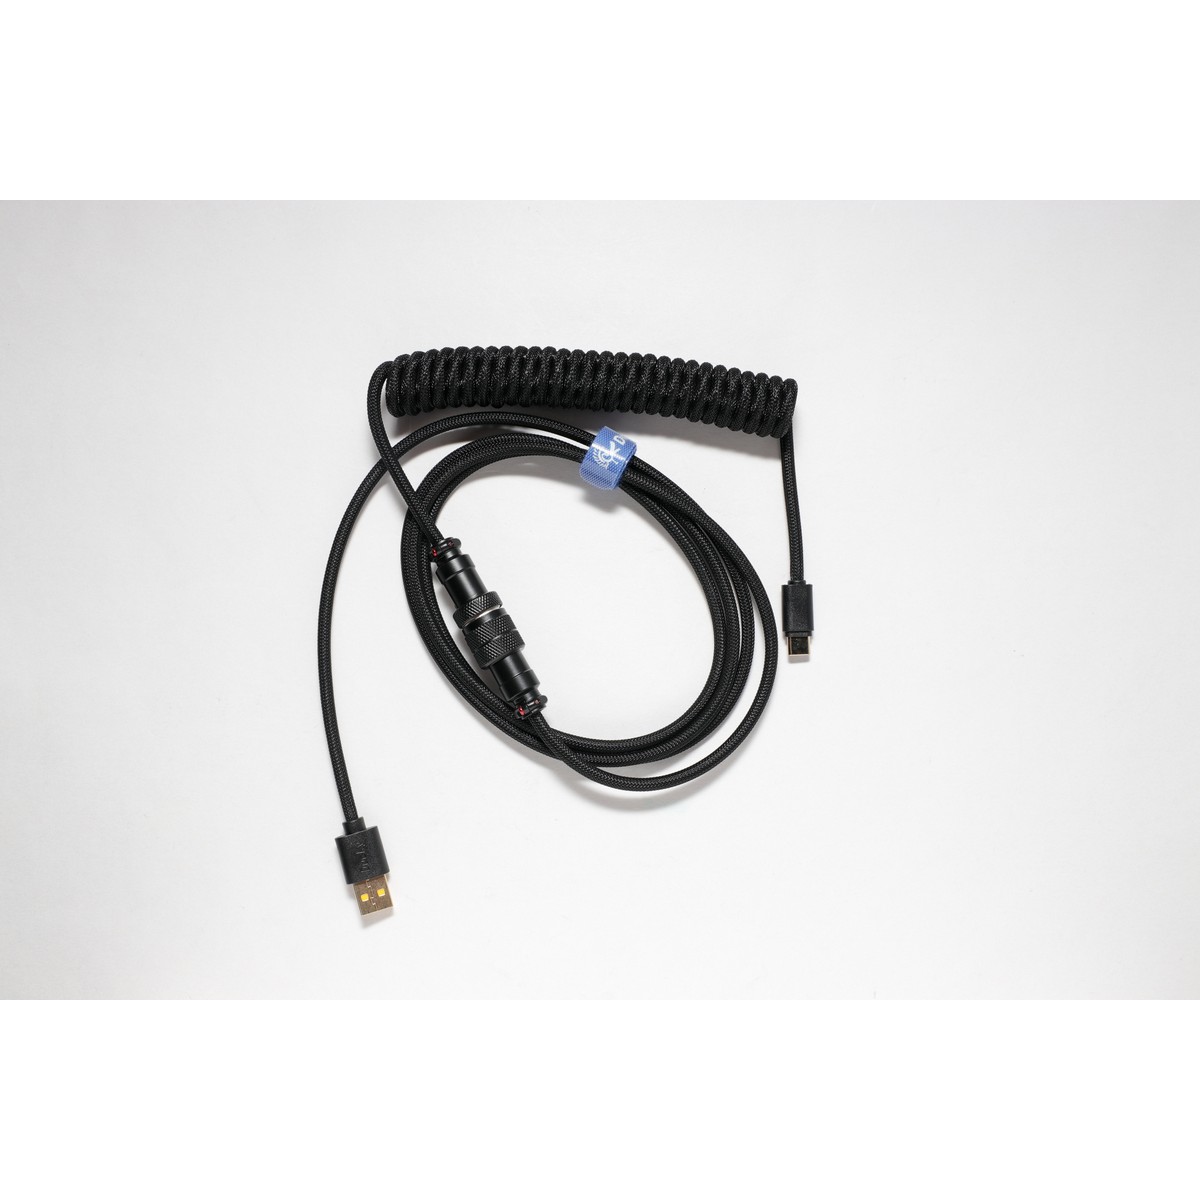 Ducky Premicord USB Coiled Keyboard Cable - Phantom Black- 1.8m